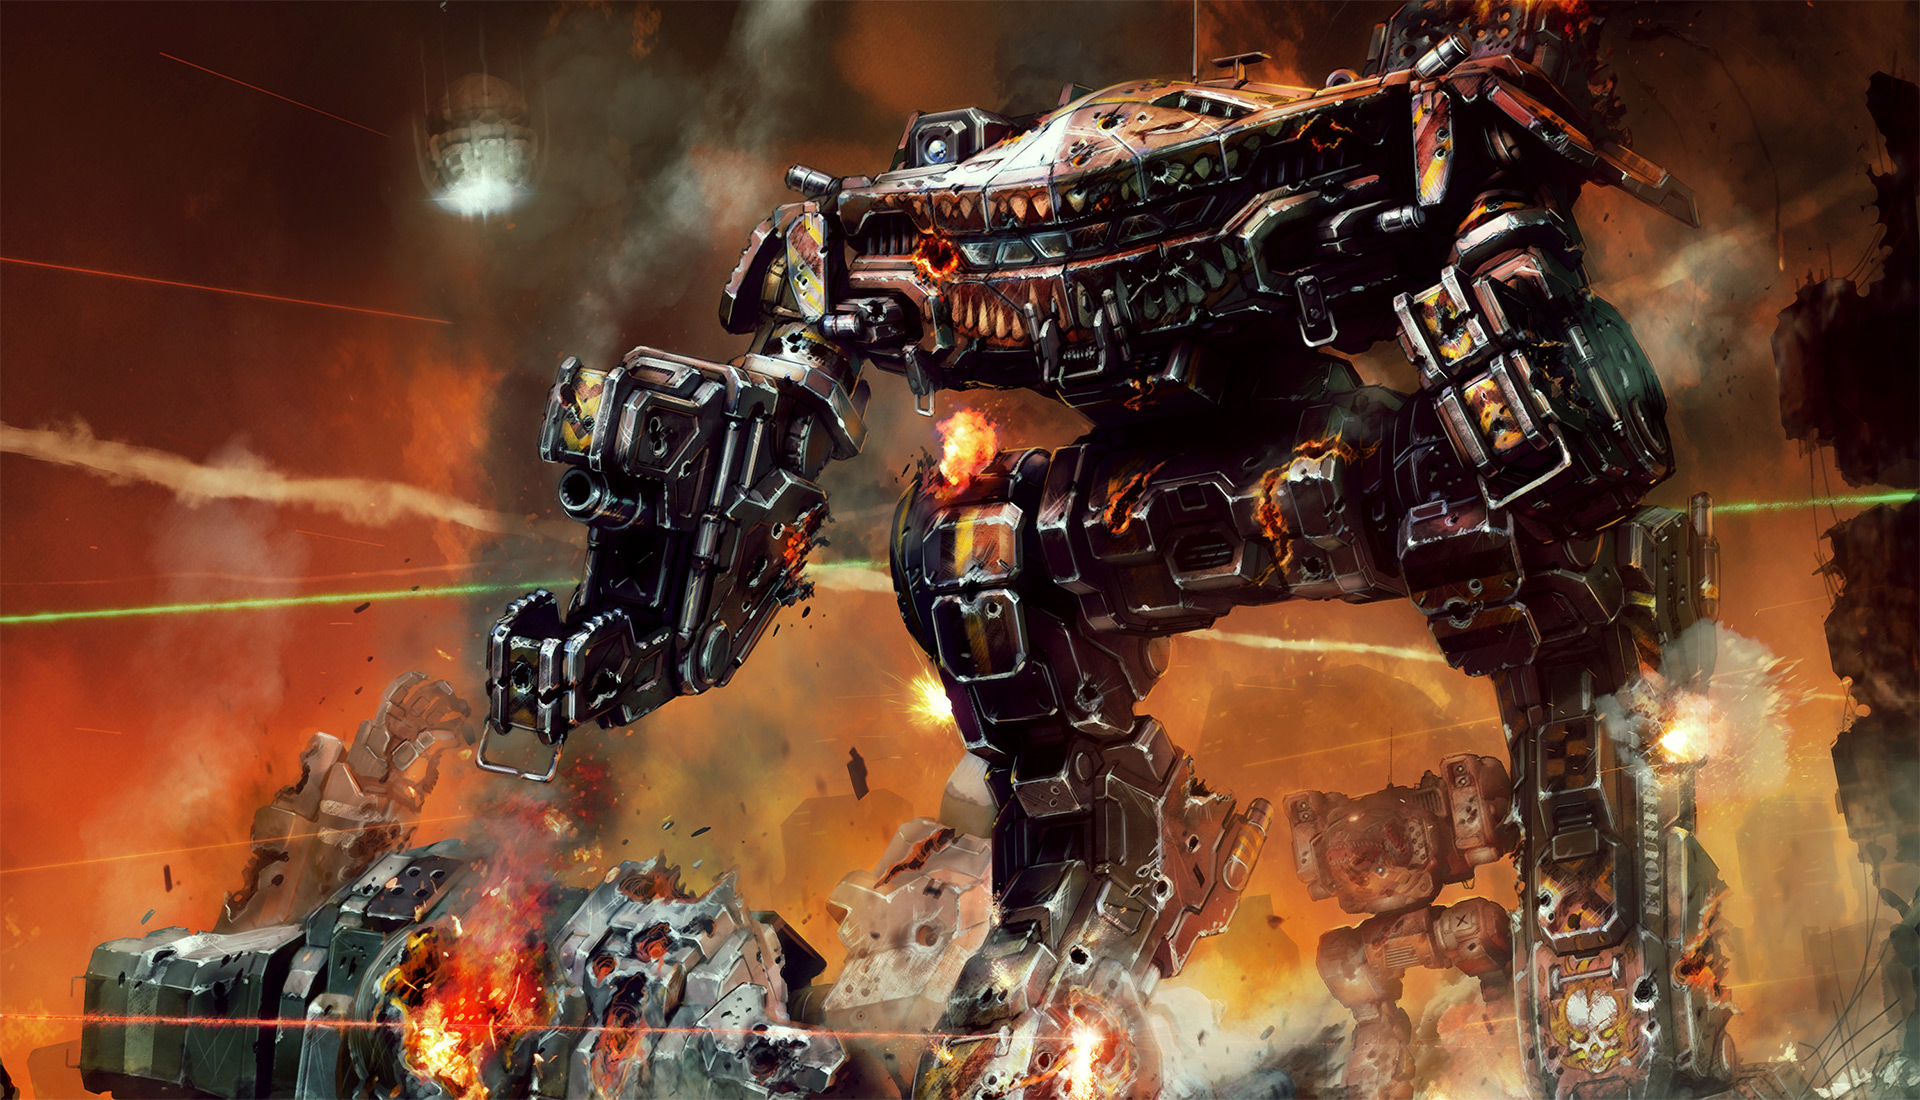 MechWarrior Release Date Revealed; Read Our Latest Of Its Mayhem - GameSpot